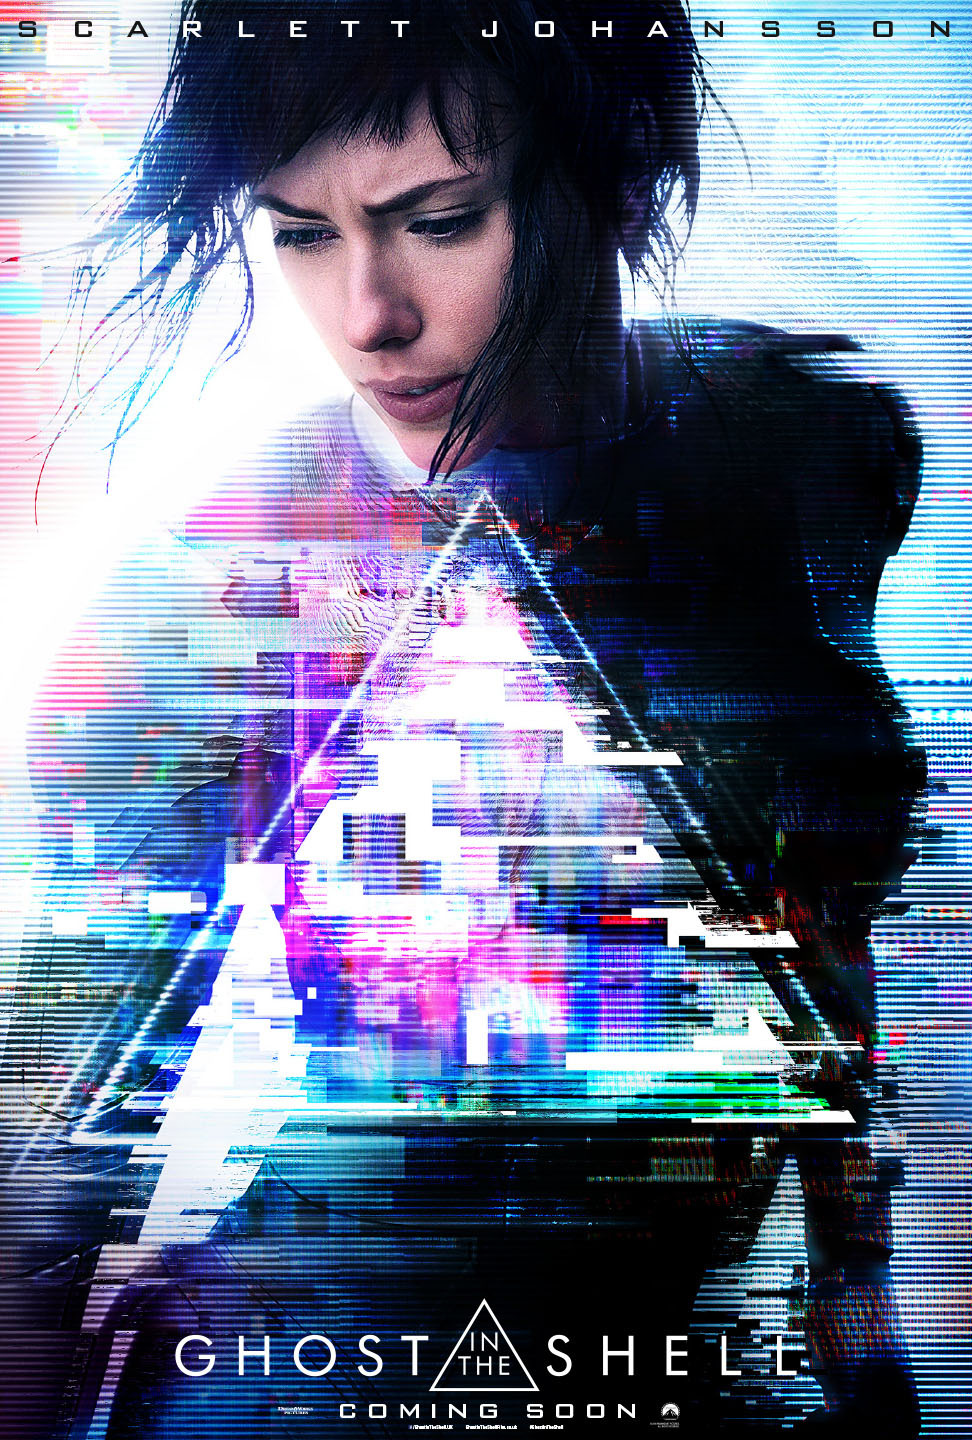 Ghost In The Shell poster.jpg